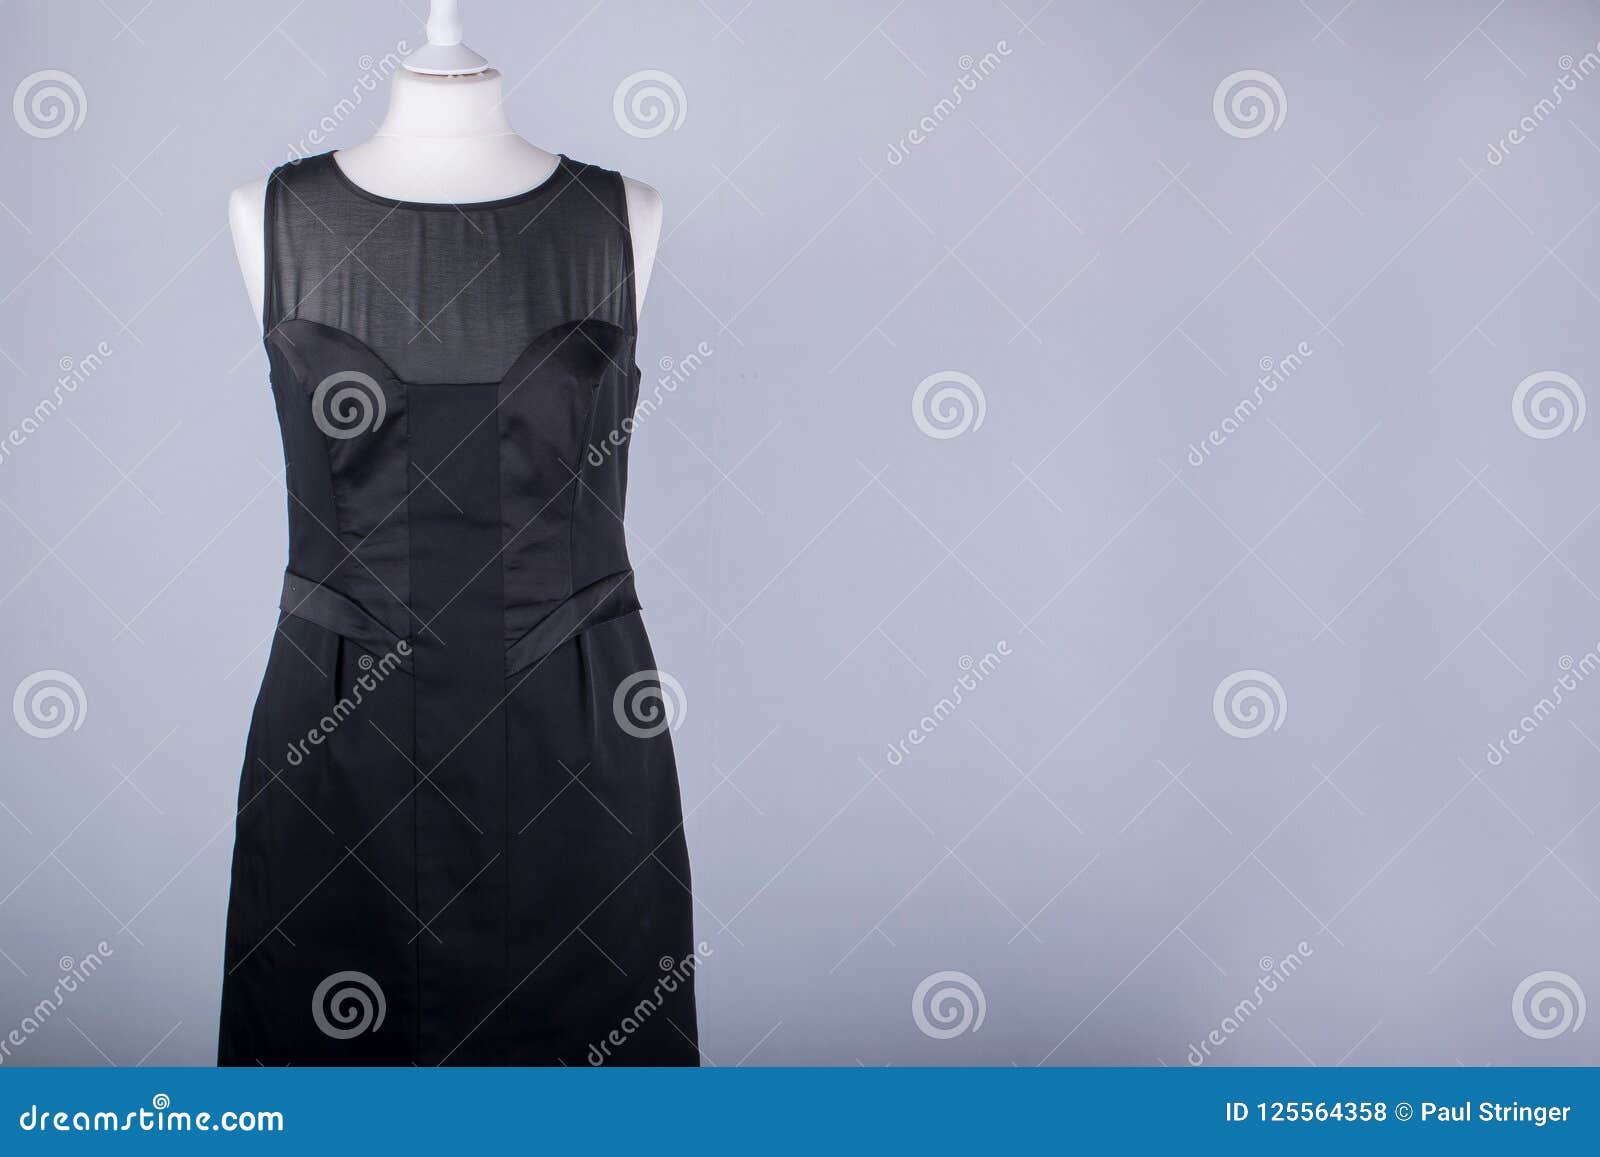 Tailors Mannequin Dressed in a Black Dress with Netting Stock Photo ...